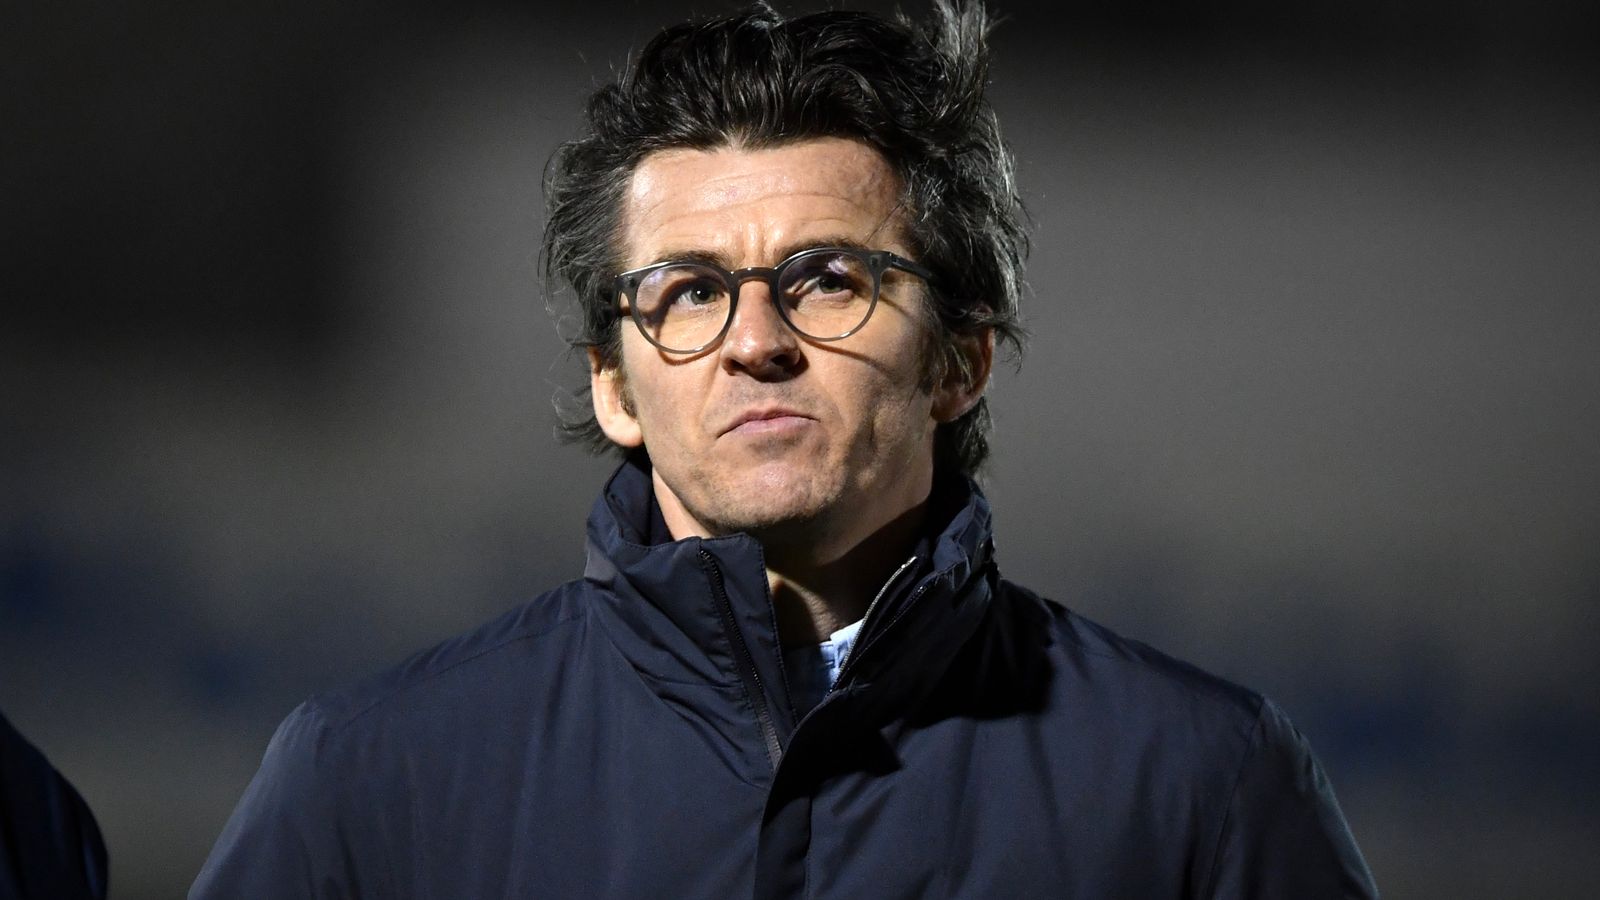 Joey Barton: Bristol Rovers manager charged with assault by beating after woman suffers head injury